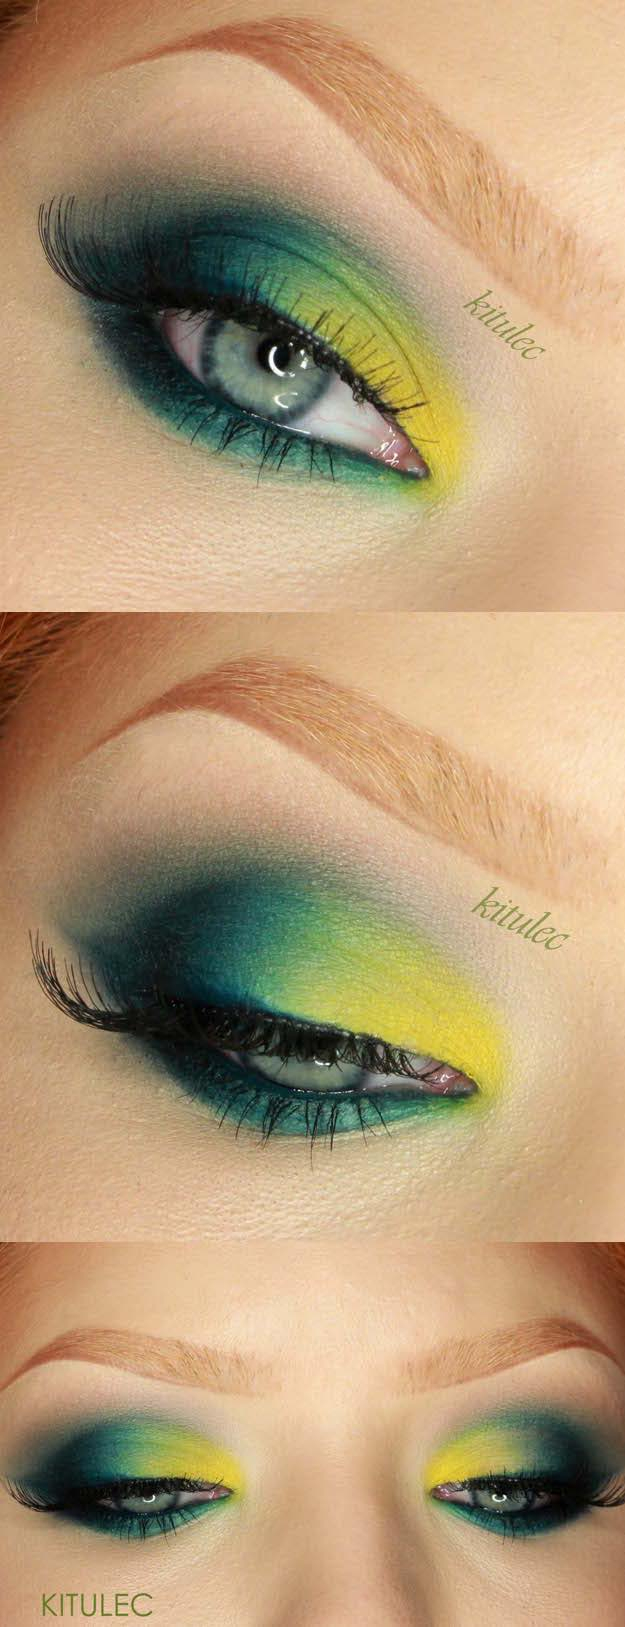 Makeup For Green Eyes 50 Perfect Makeup Tutorials For Green Eyes The Goddess